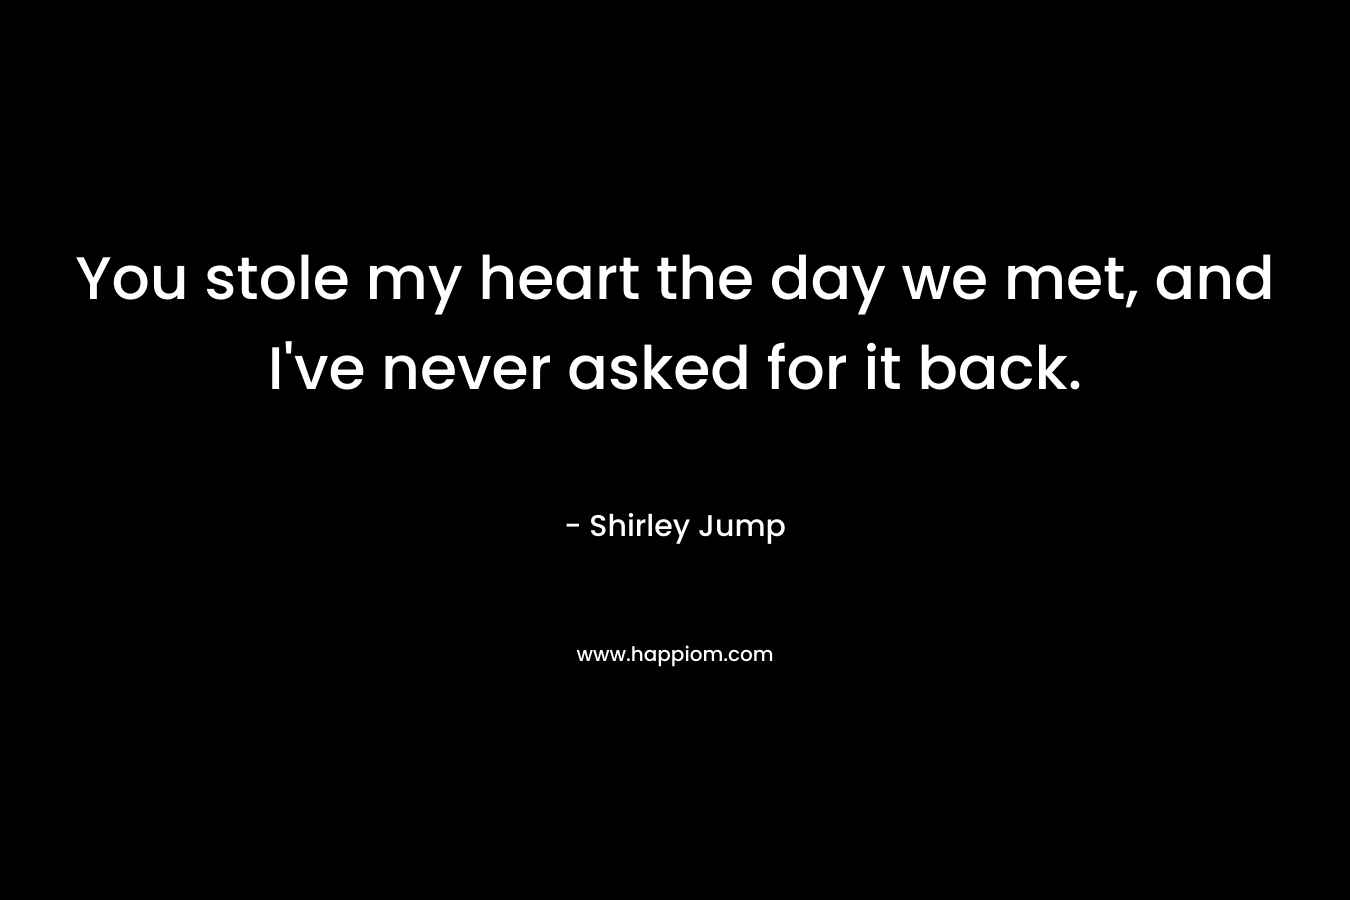 You stole my heart the day we met, and I’ve never asked for it back. – Shirley Jump